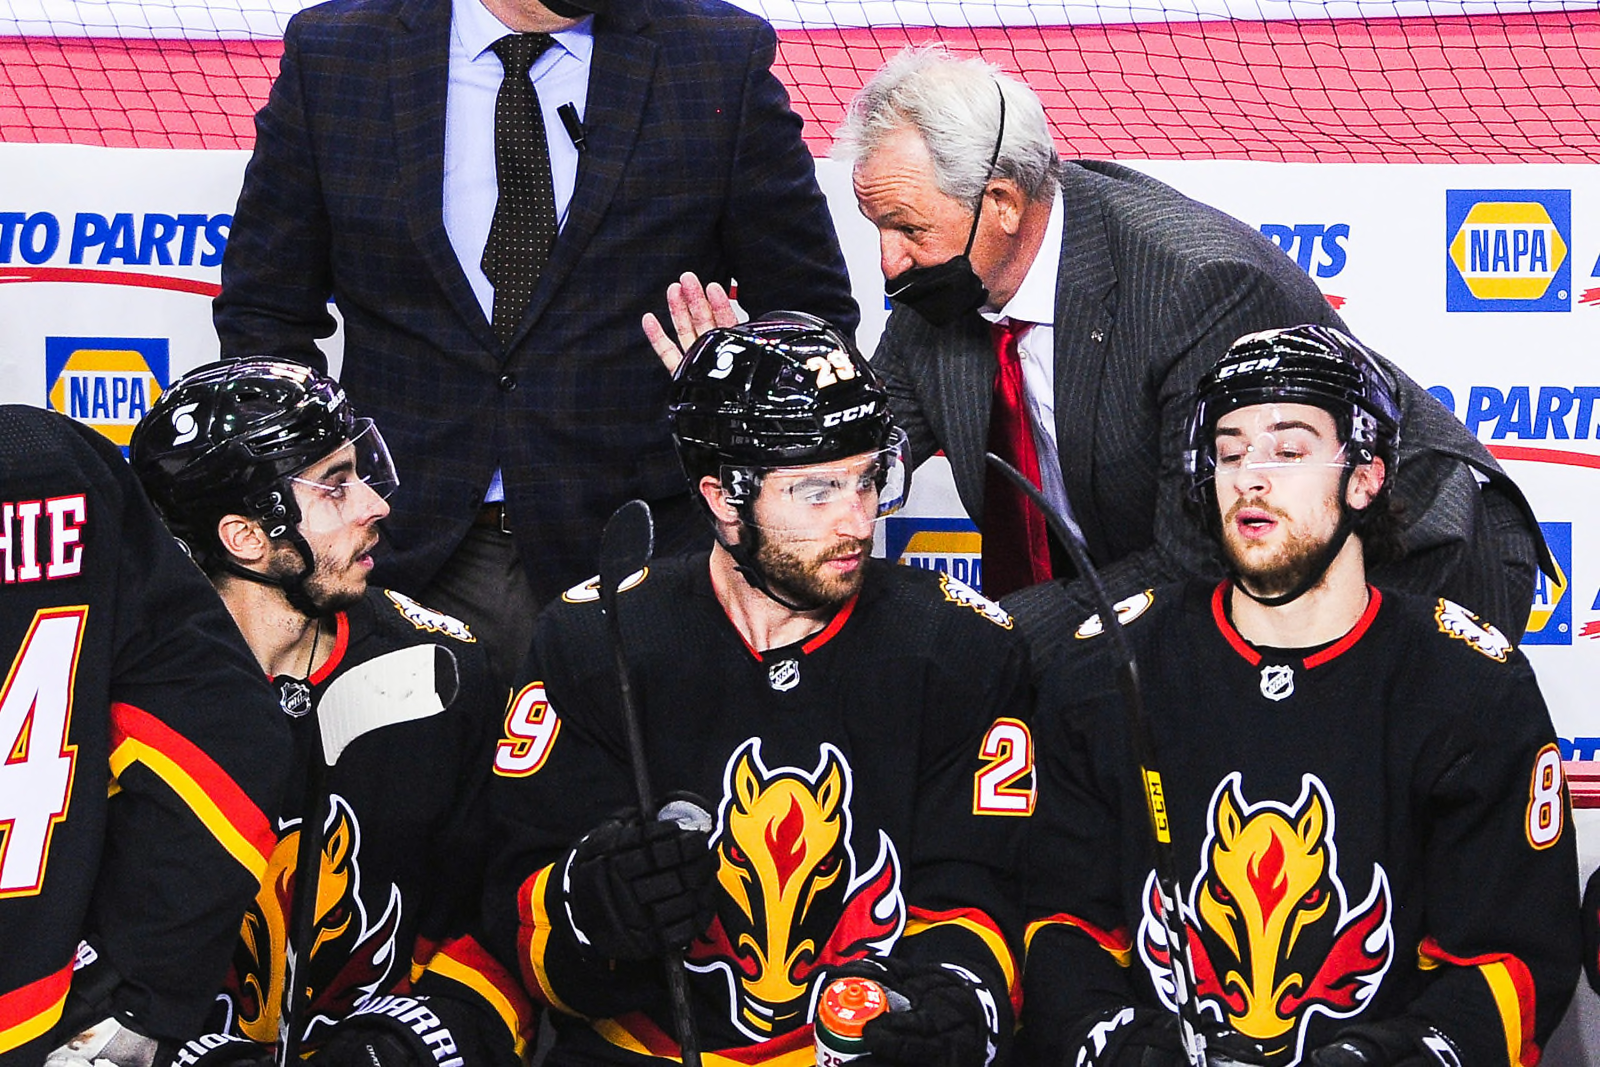 Calgary Flames: Initial reactions after first 5 games under Darryl Sutter